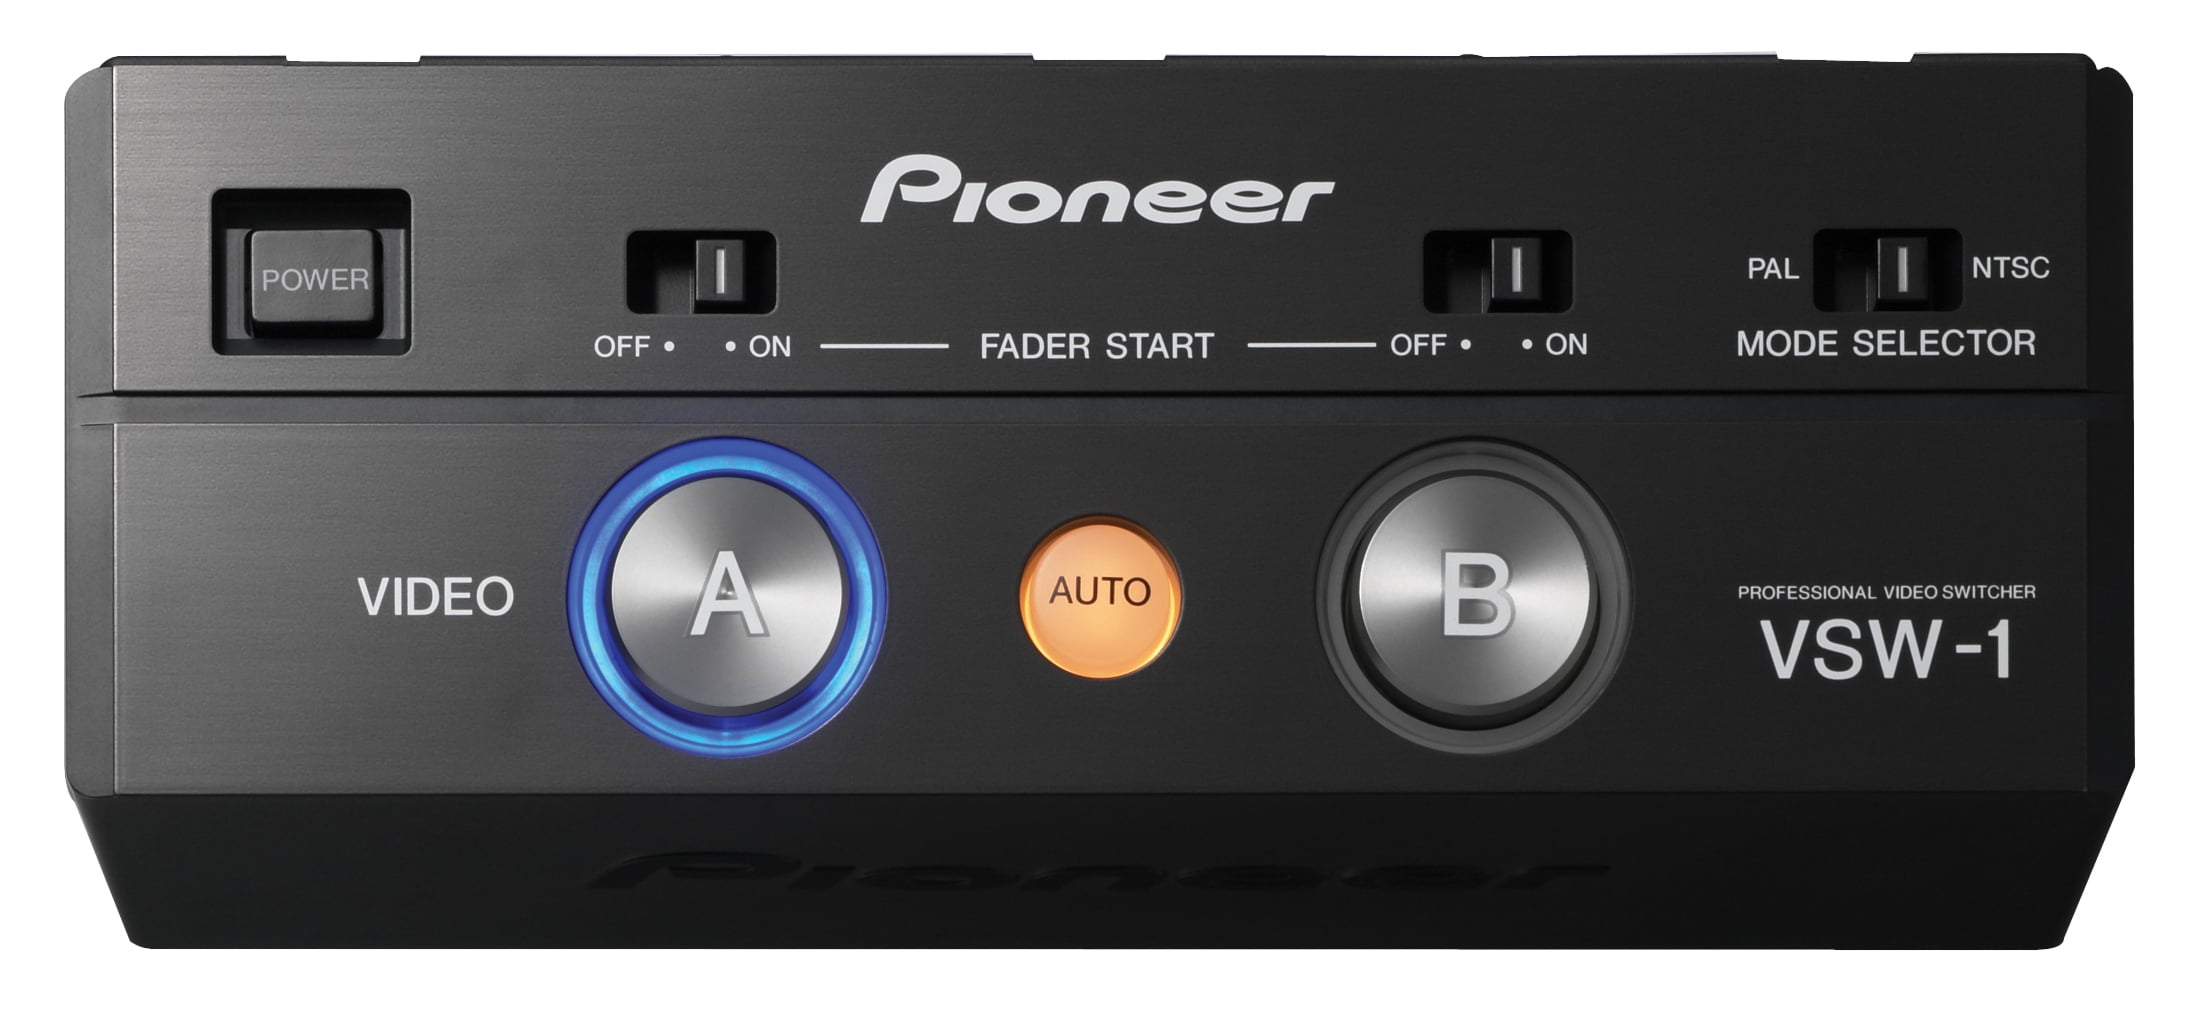 Pioneer Automatic Video Switcher for DVJ-1000 vsw1 